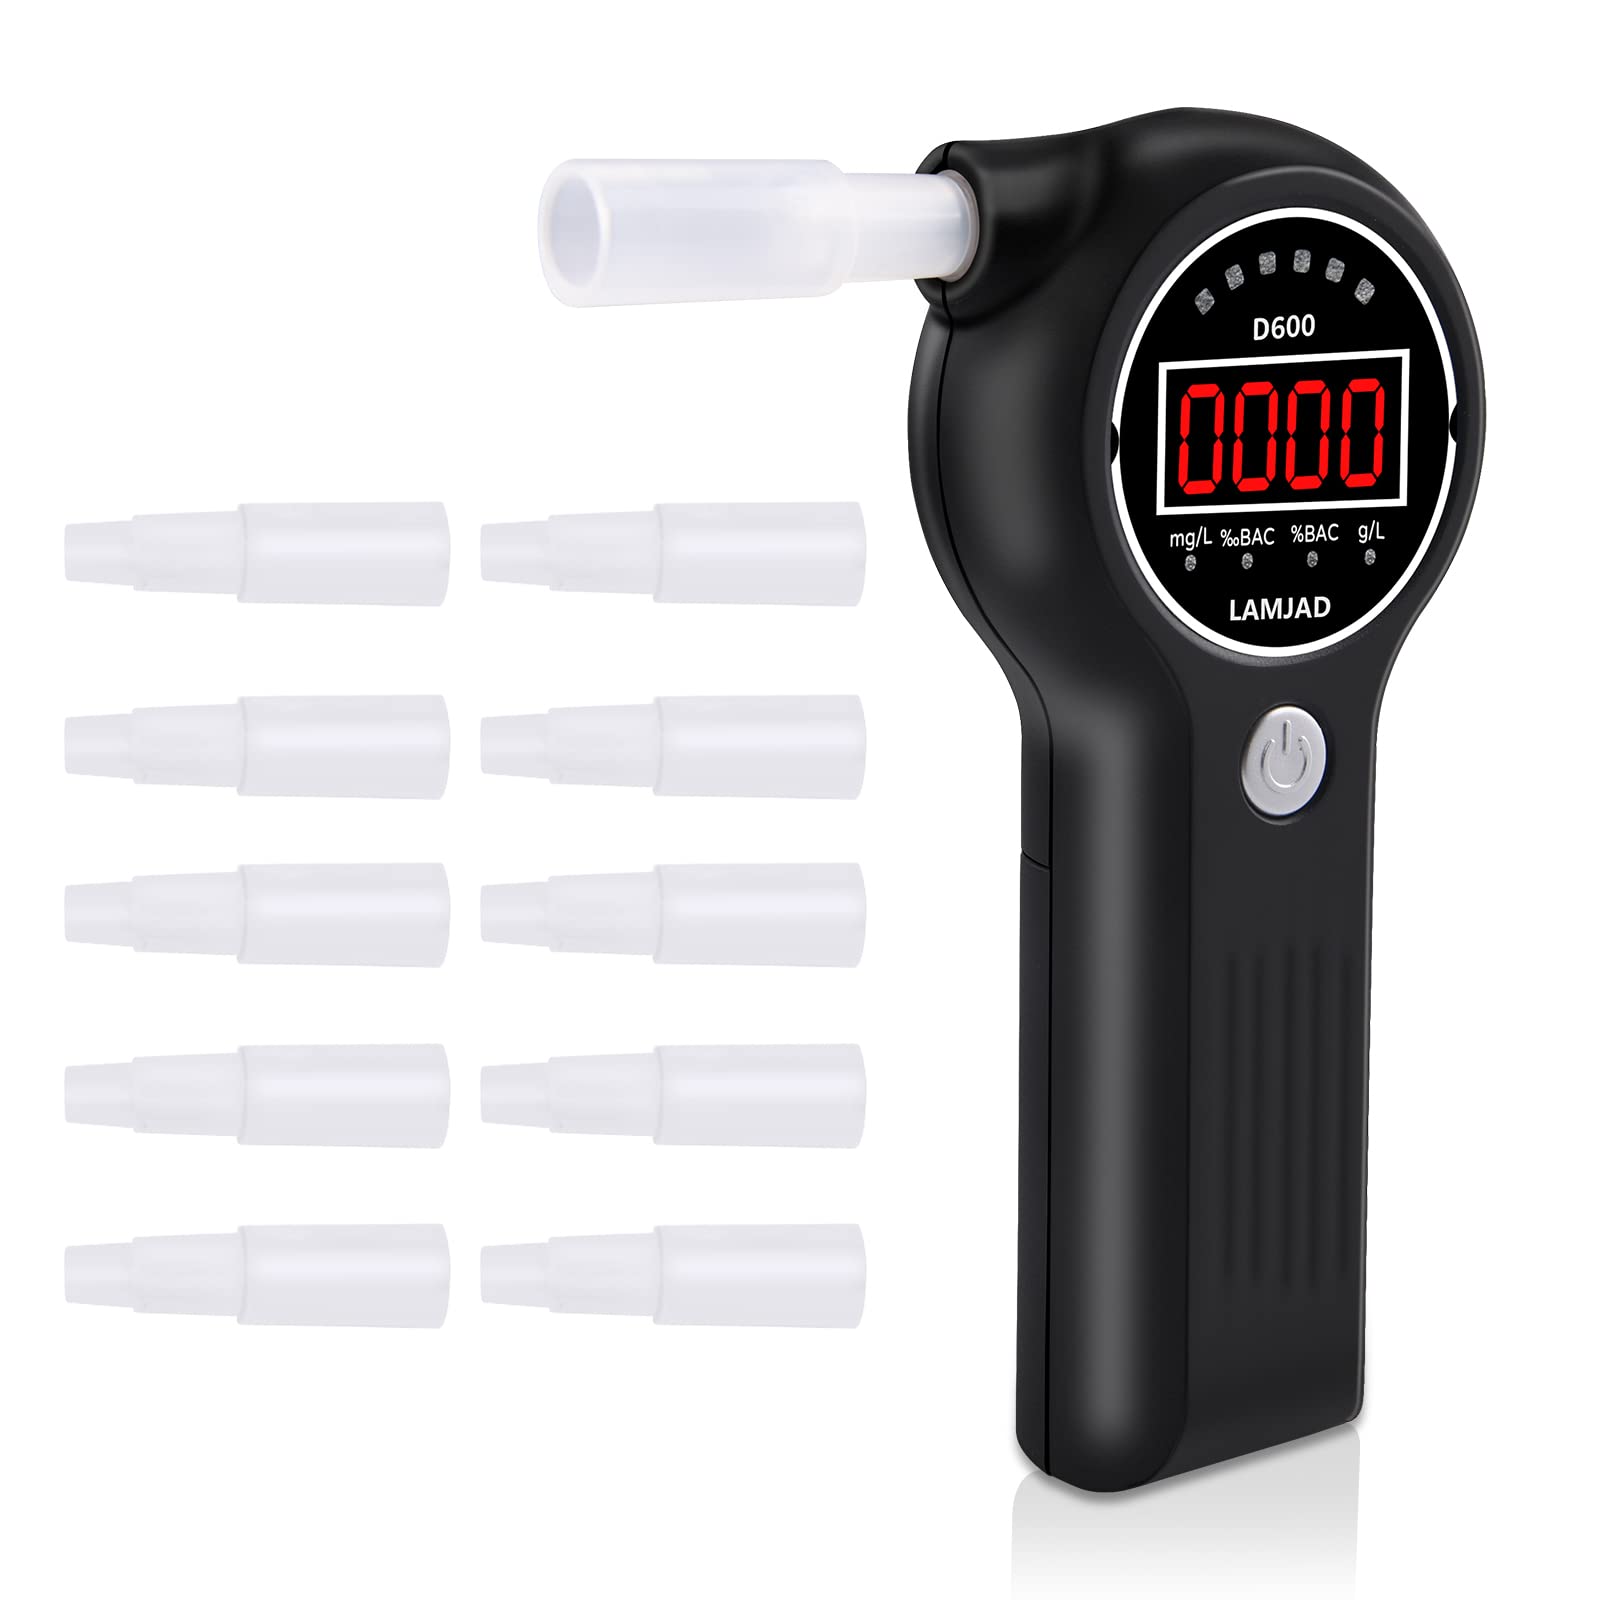  LAMJAD Breathalyzer, Professional Alcohol Tester with 10  Mouthpieces, Alarm Light and LED Display, Portable Breathalyzer for  Personal and Professional Use(D600) : Health & Household